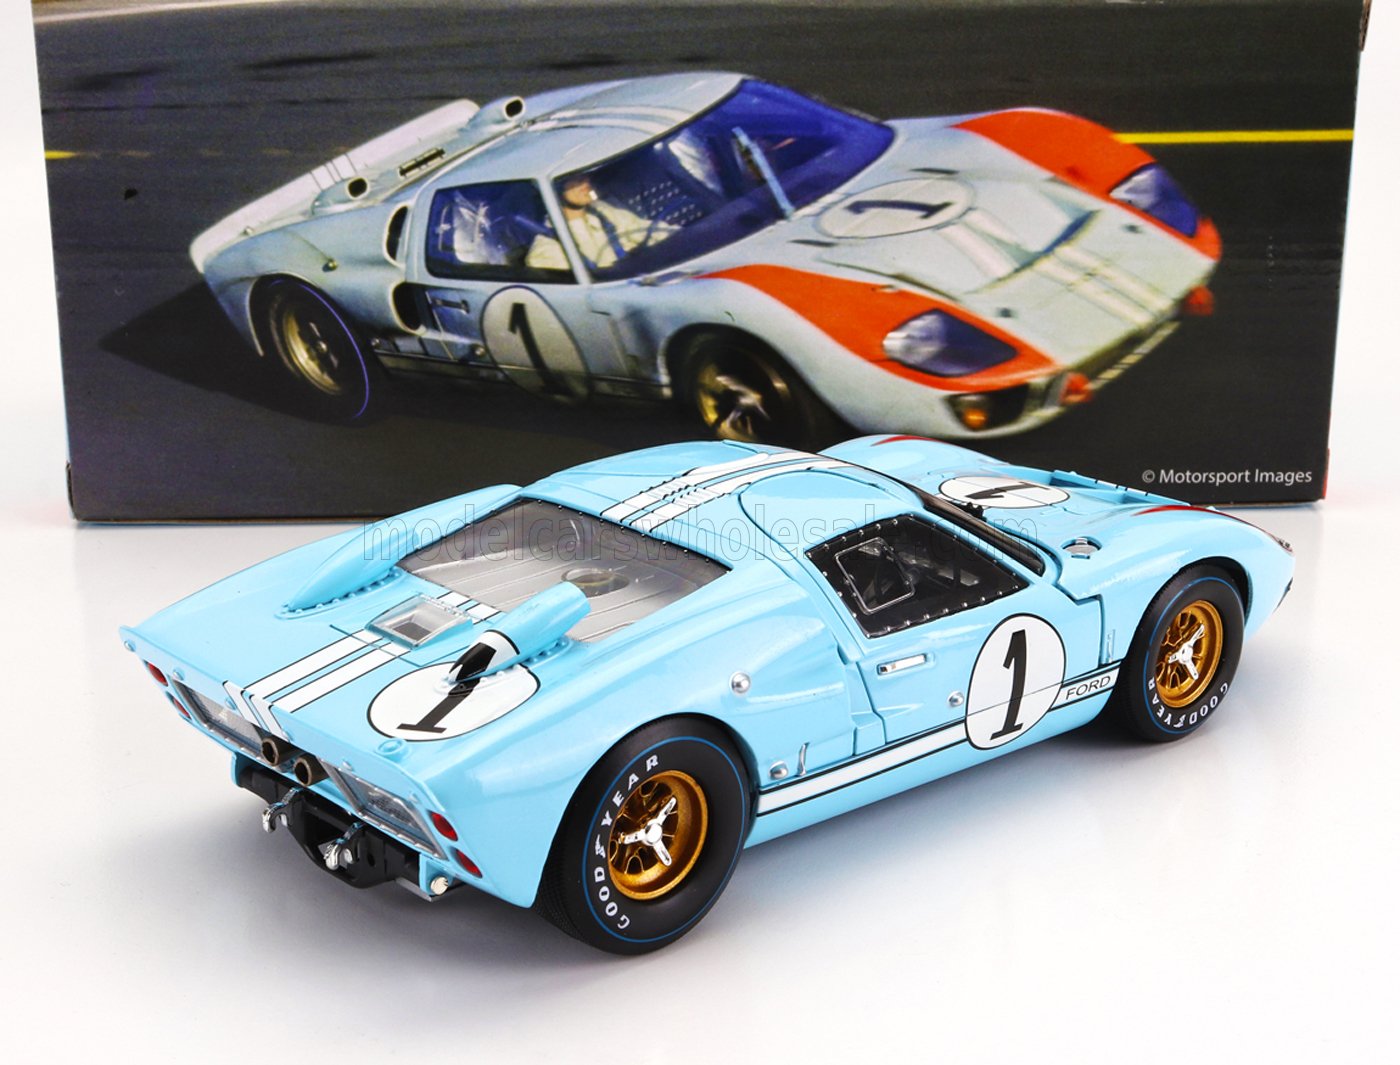 SHELBY-COLLECTIBLES - 1/18 - FORD USA - GT40 MKII 7.0L V8 TEAM SHELBY AMERICAN INC. N 1 2nd (BUT REALLY WINNER) 24h LE MANS 1966 K.MILES - D.HULME - LIGHT BLUE